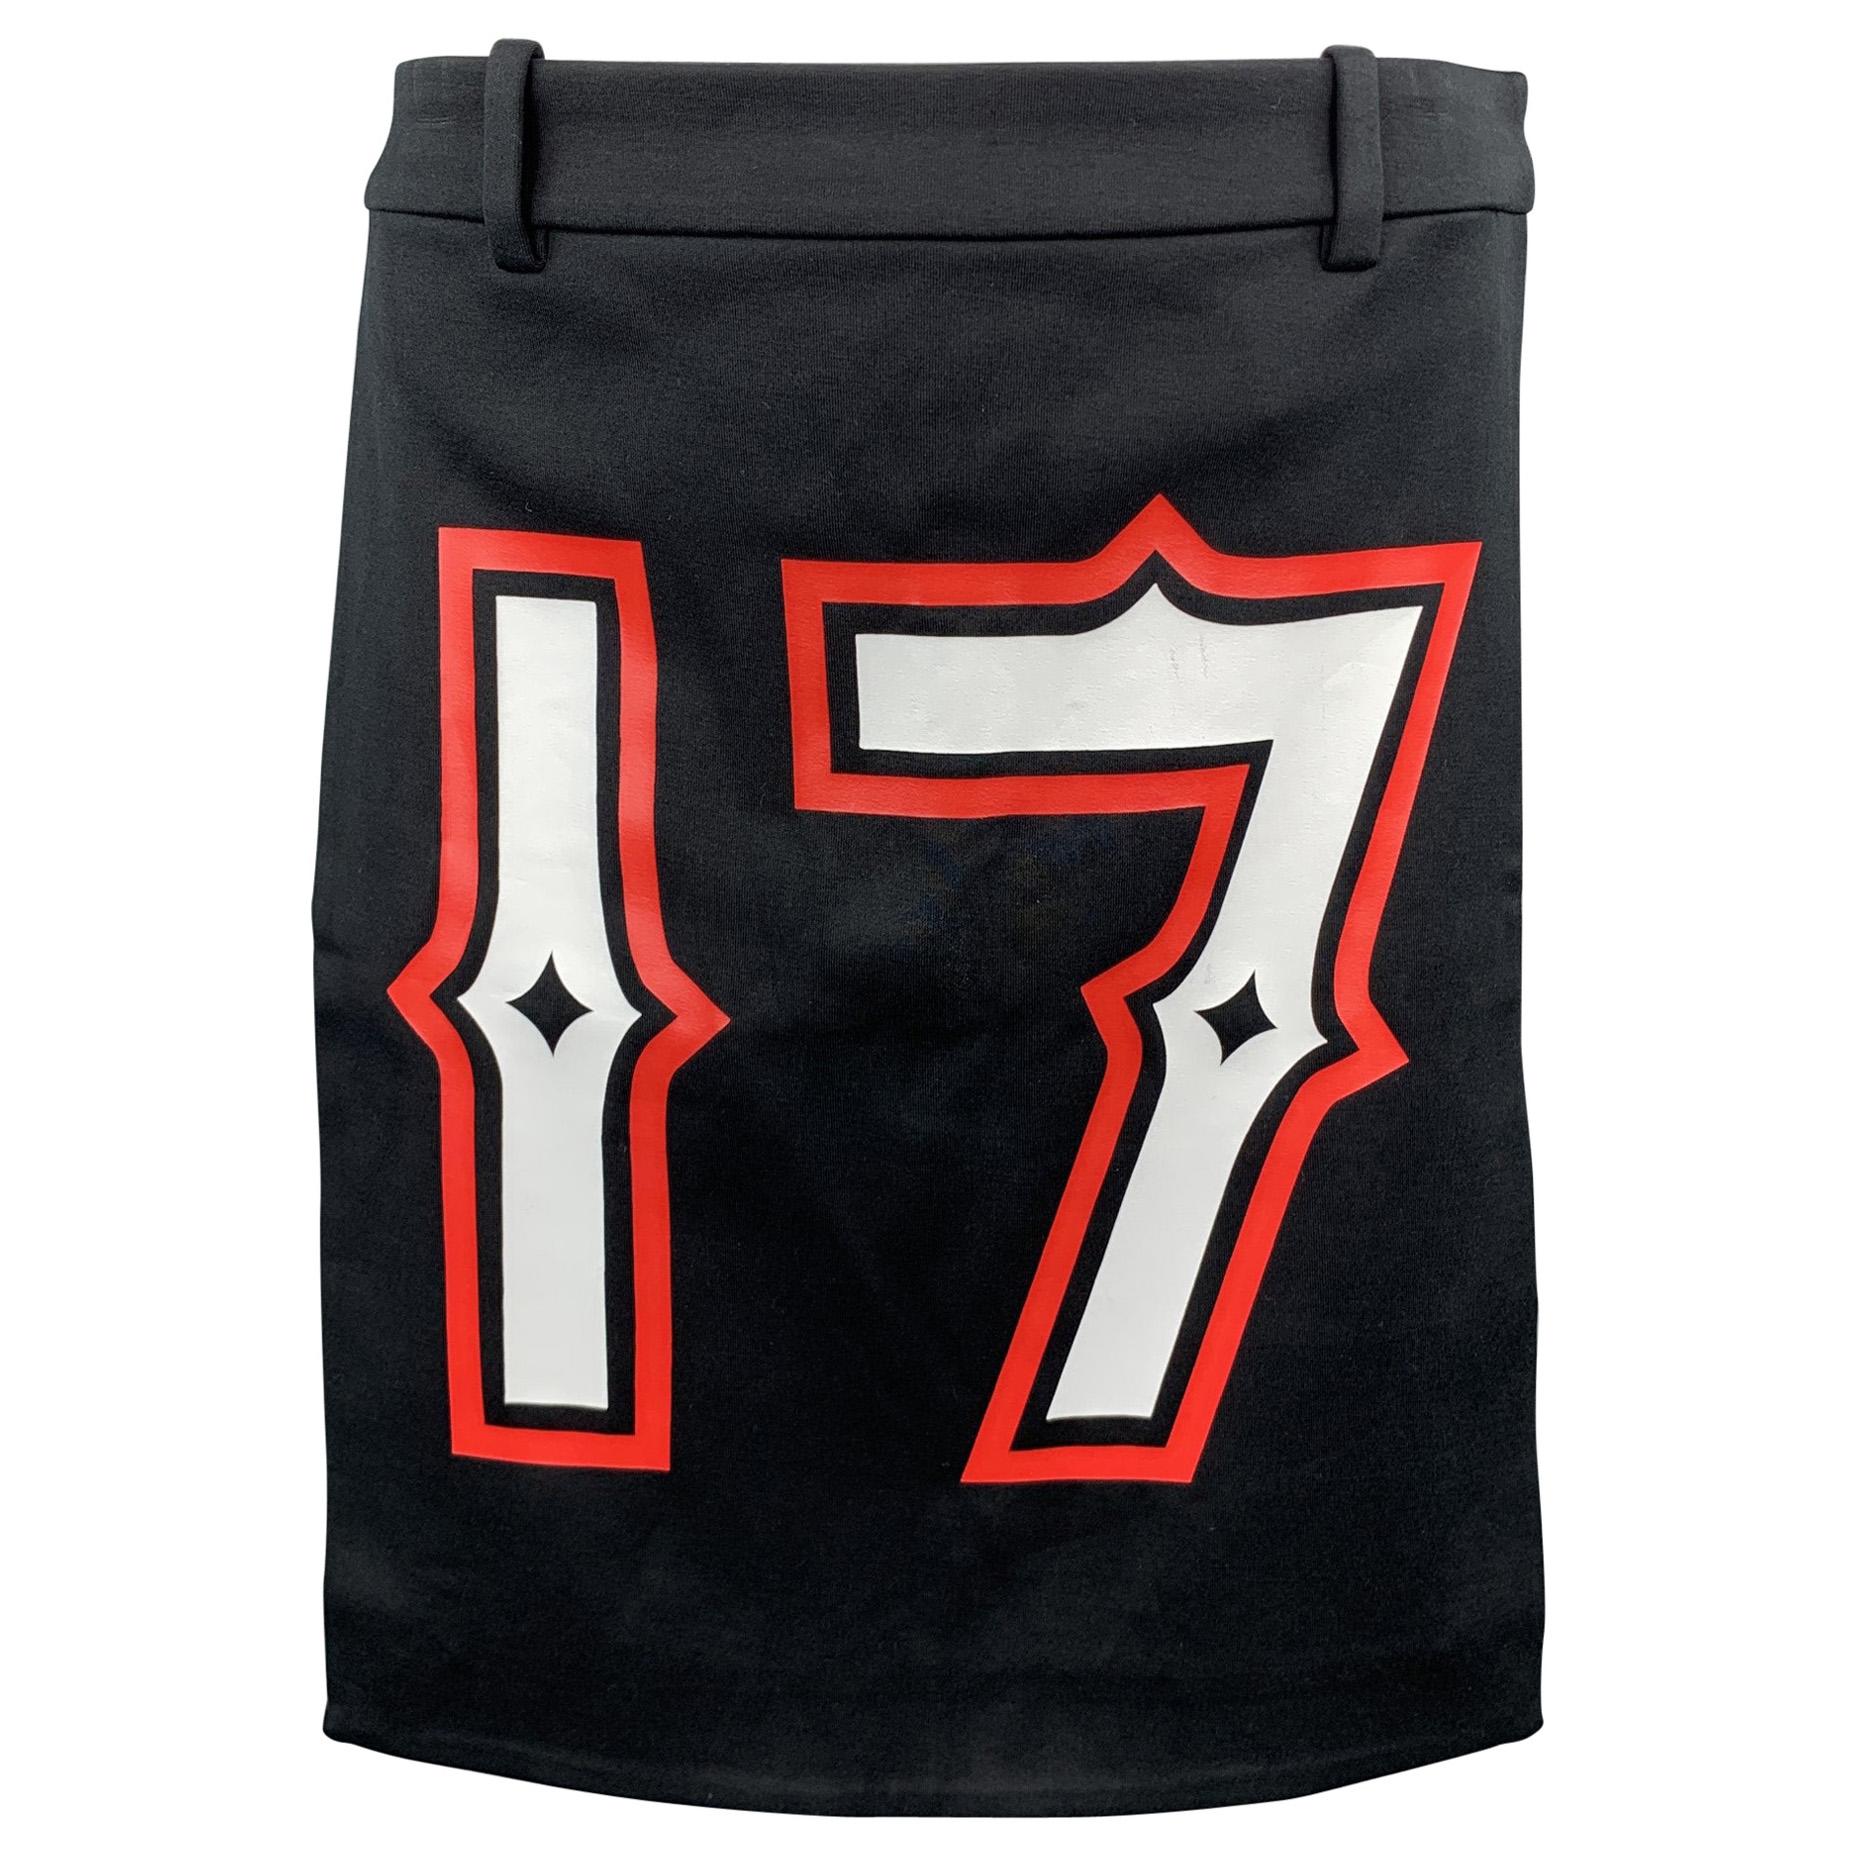 GIVENCHY Spring 2014 Size 28 Black "17" Graphic Polyester Apron Skirt